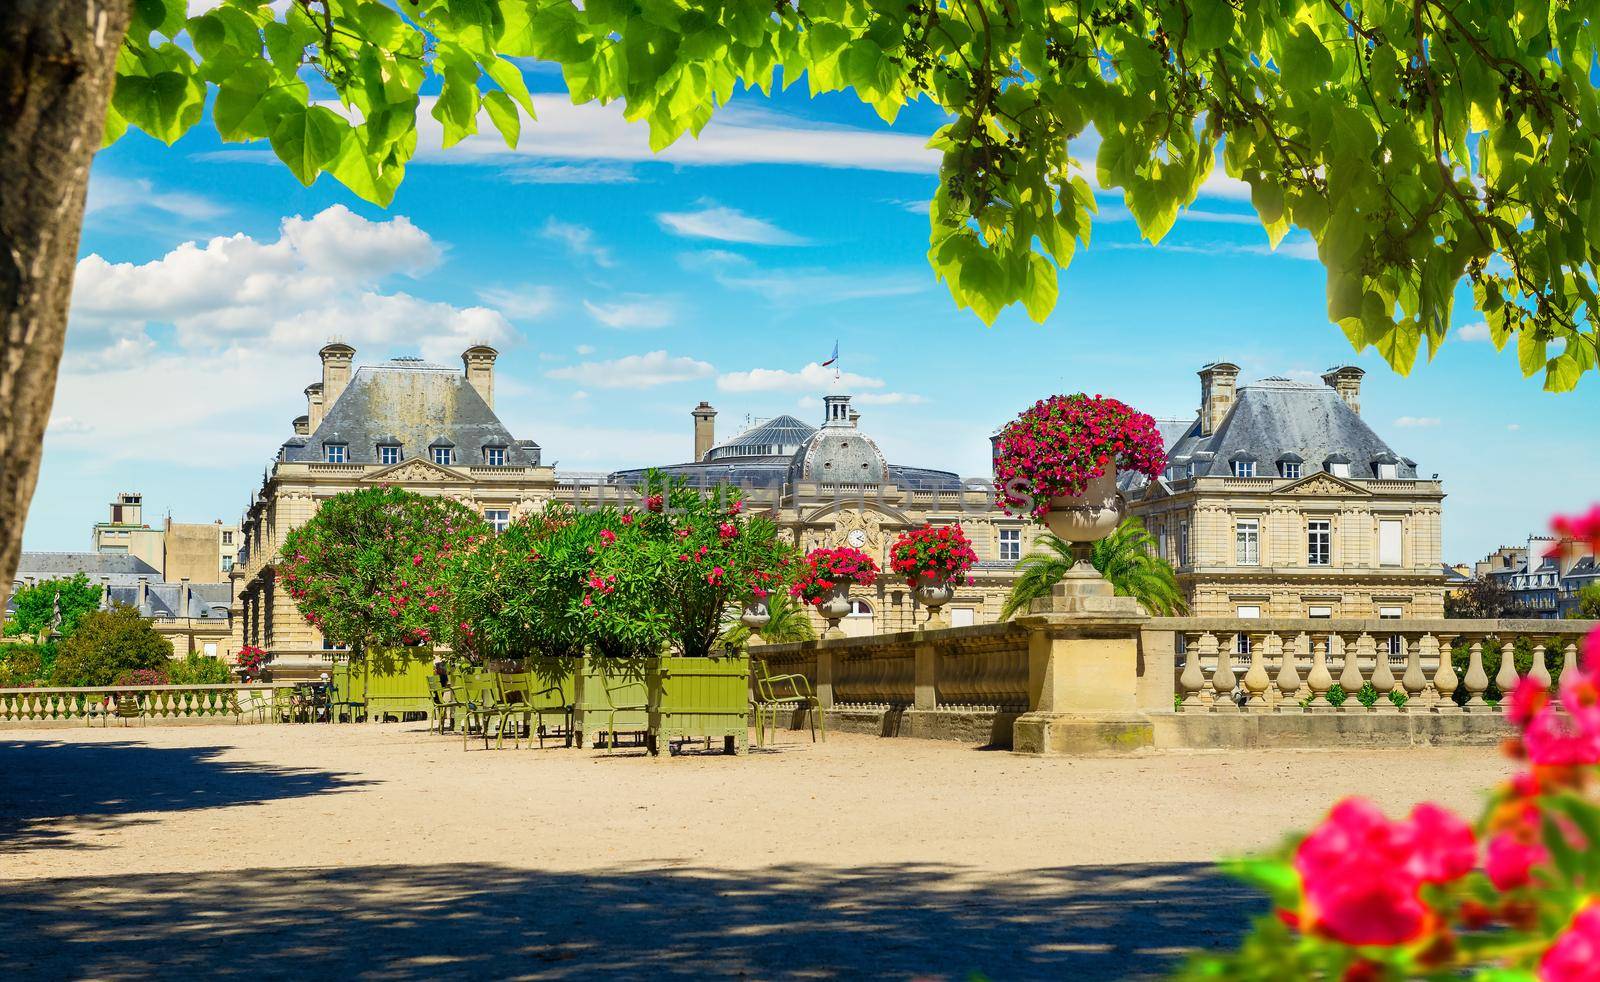 Luxembourg Gardens in Paris by Givaga